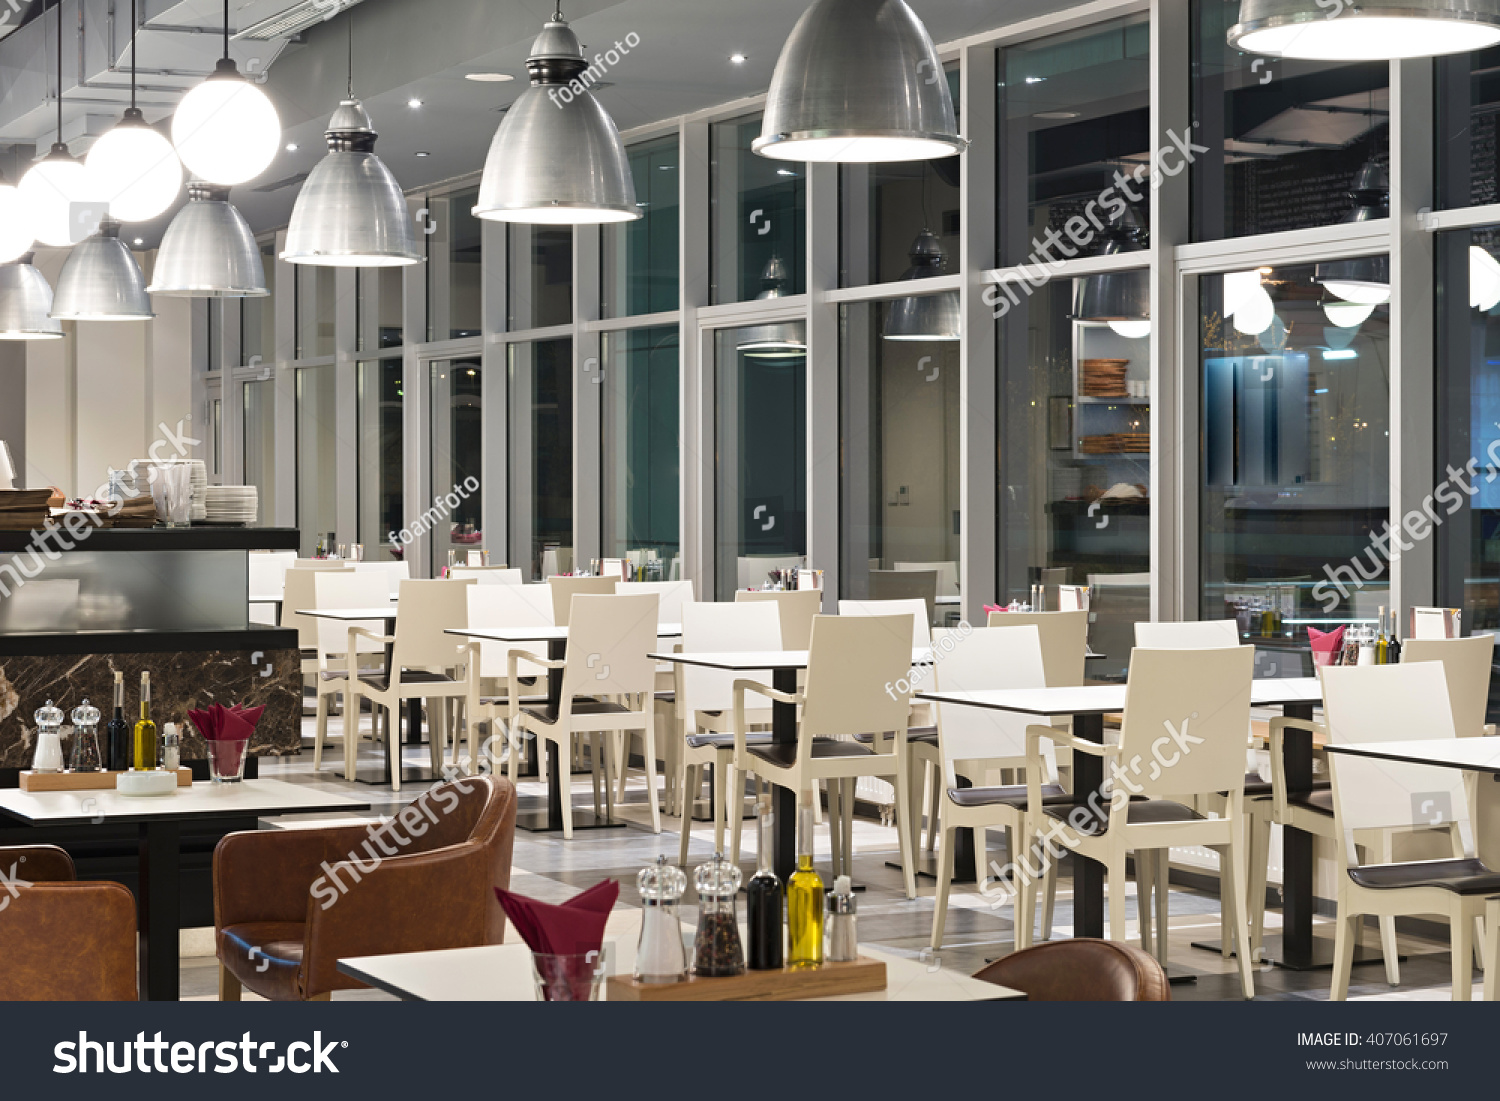 Stock Photo Modern Canteen Interior In The Evening 407061697 